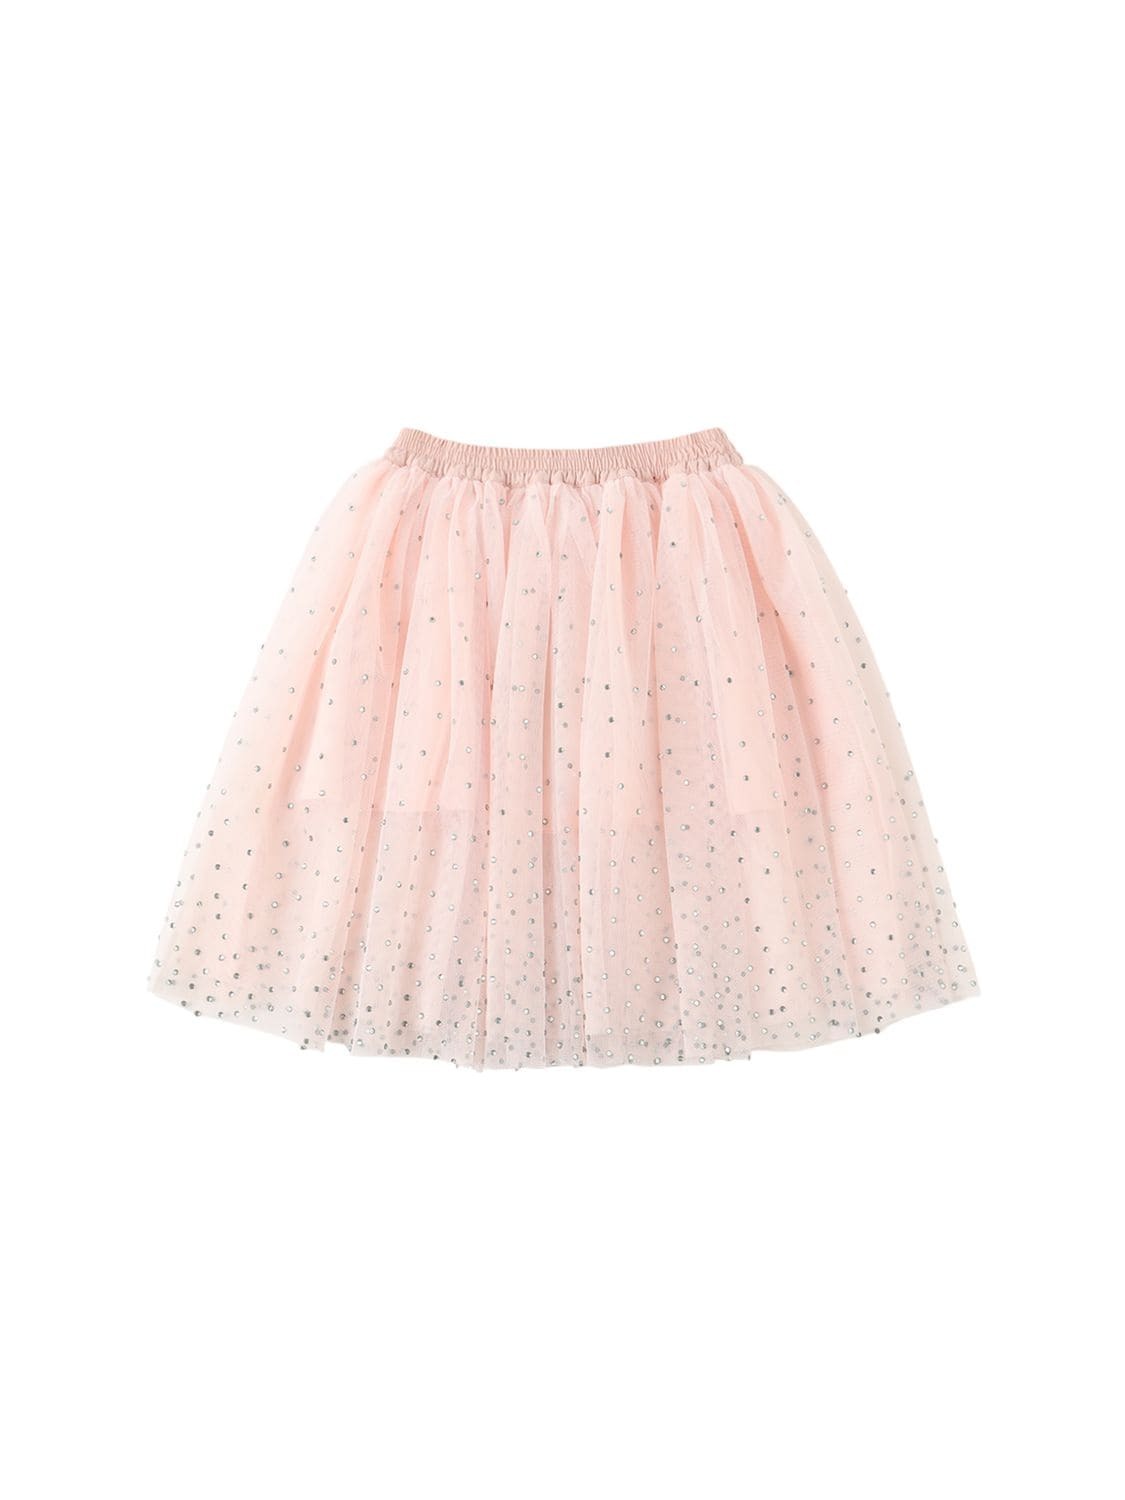 luxury semi-formal special occasion outfits for kids